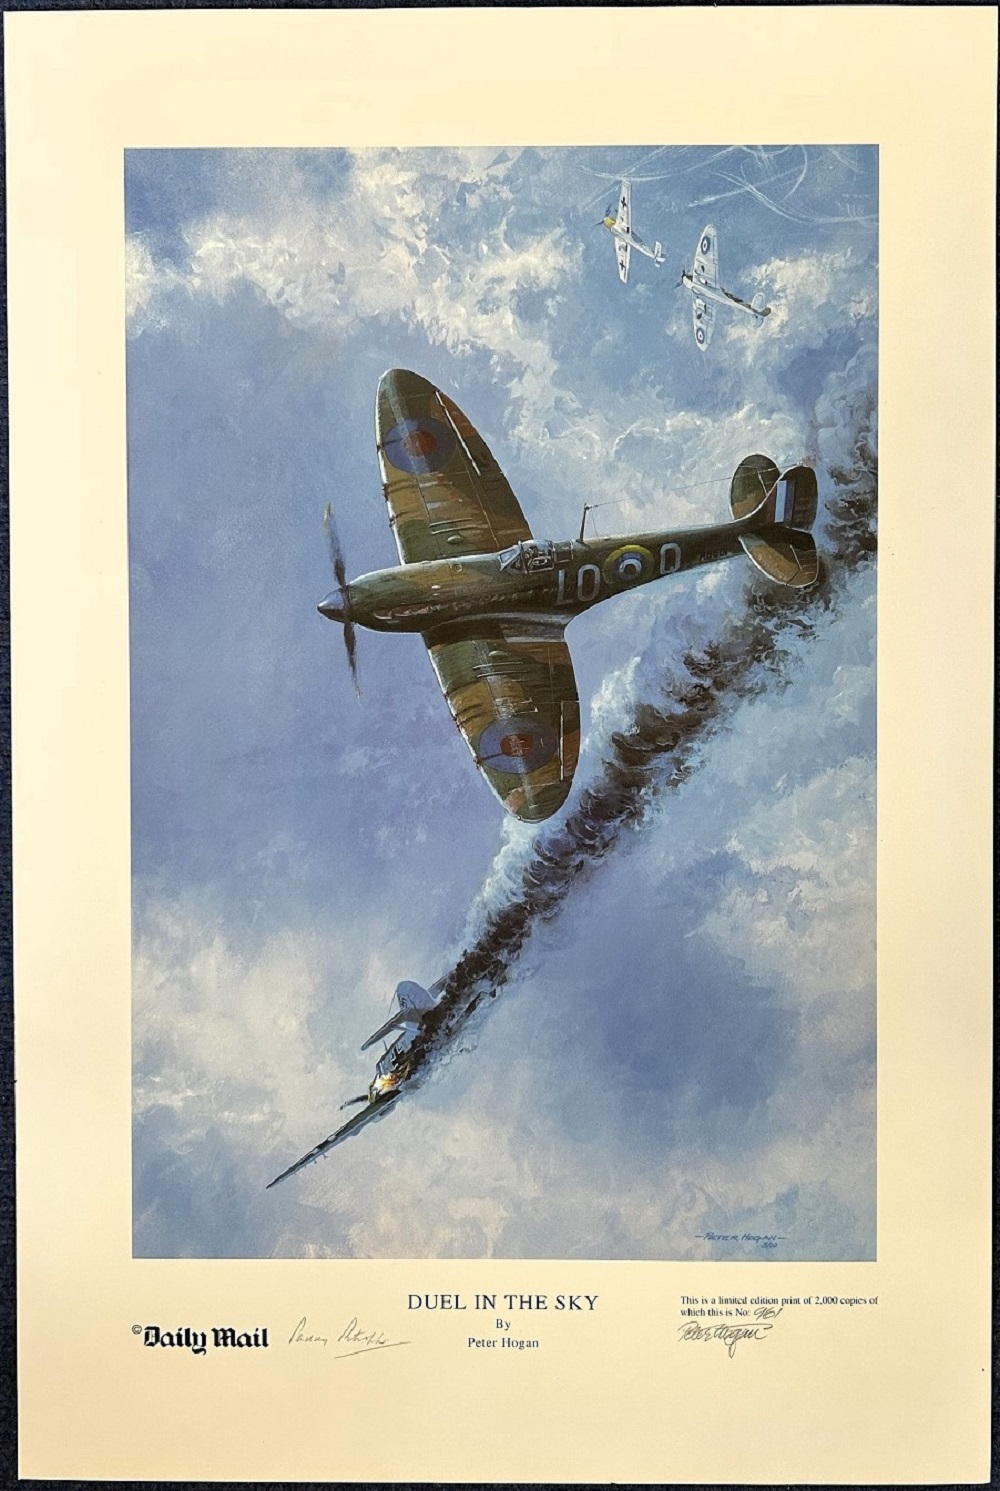 Wing Commander Paddy Barthropp and Artist Peter Hogan Signed Limited Edition Print Titled Duel in